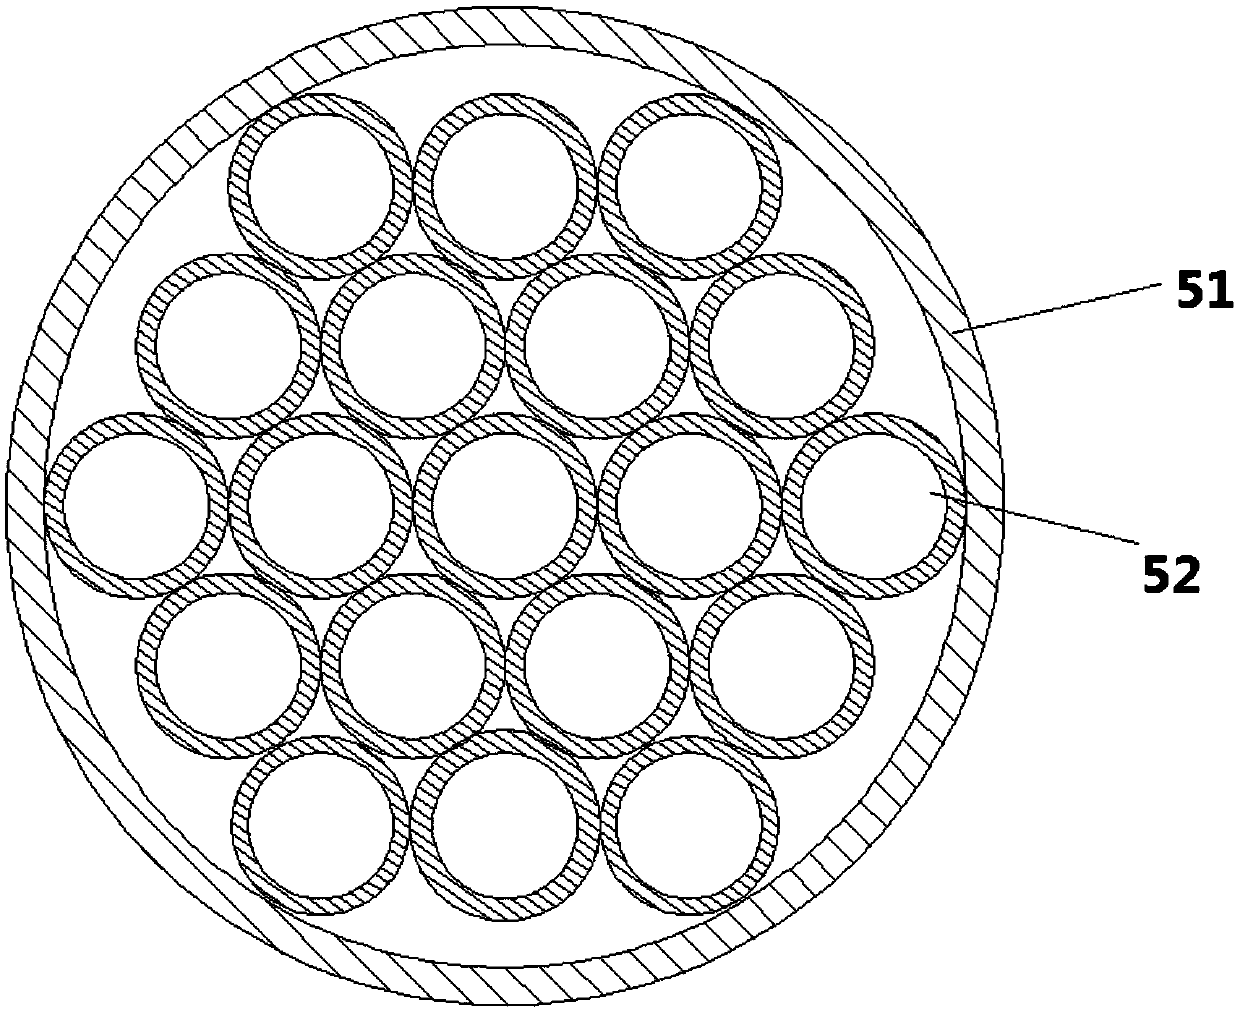 A noncondensable gas tube heat exchanger with variable spacing of flow stabilization devices